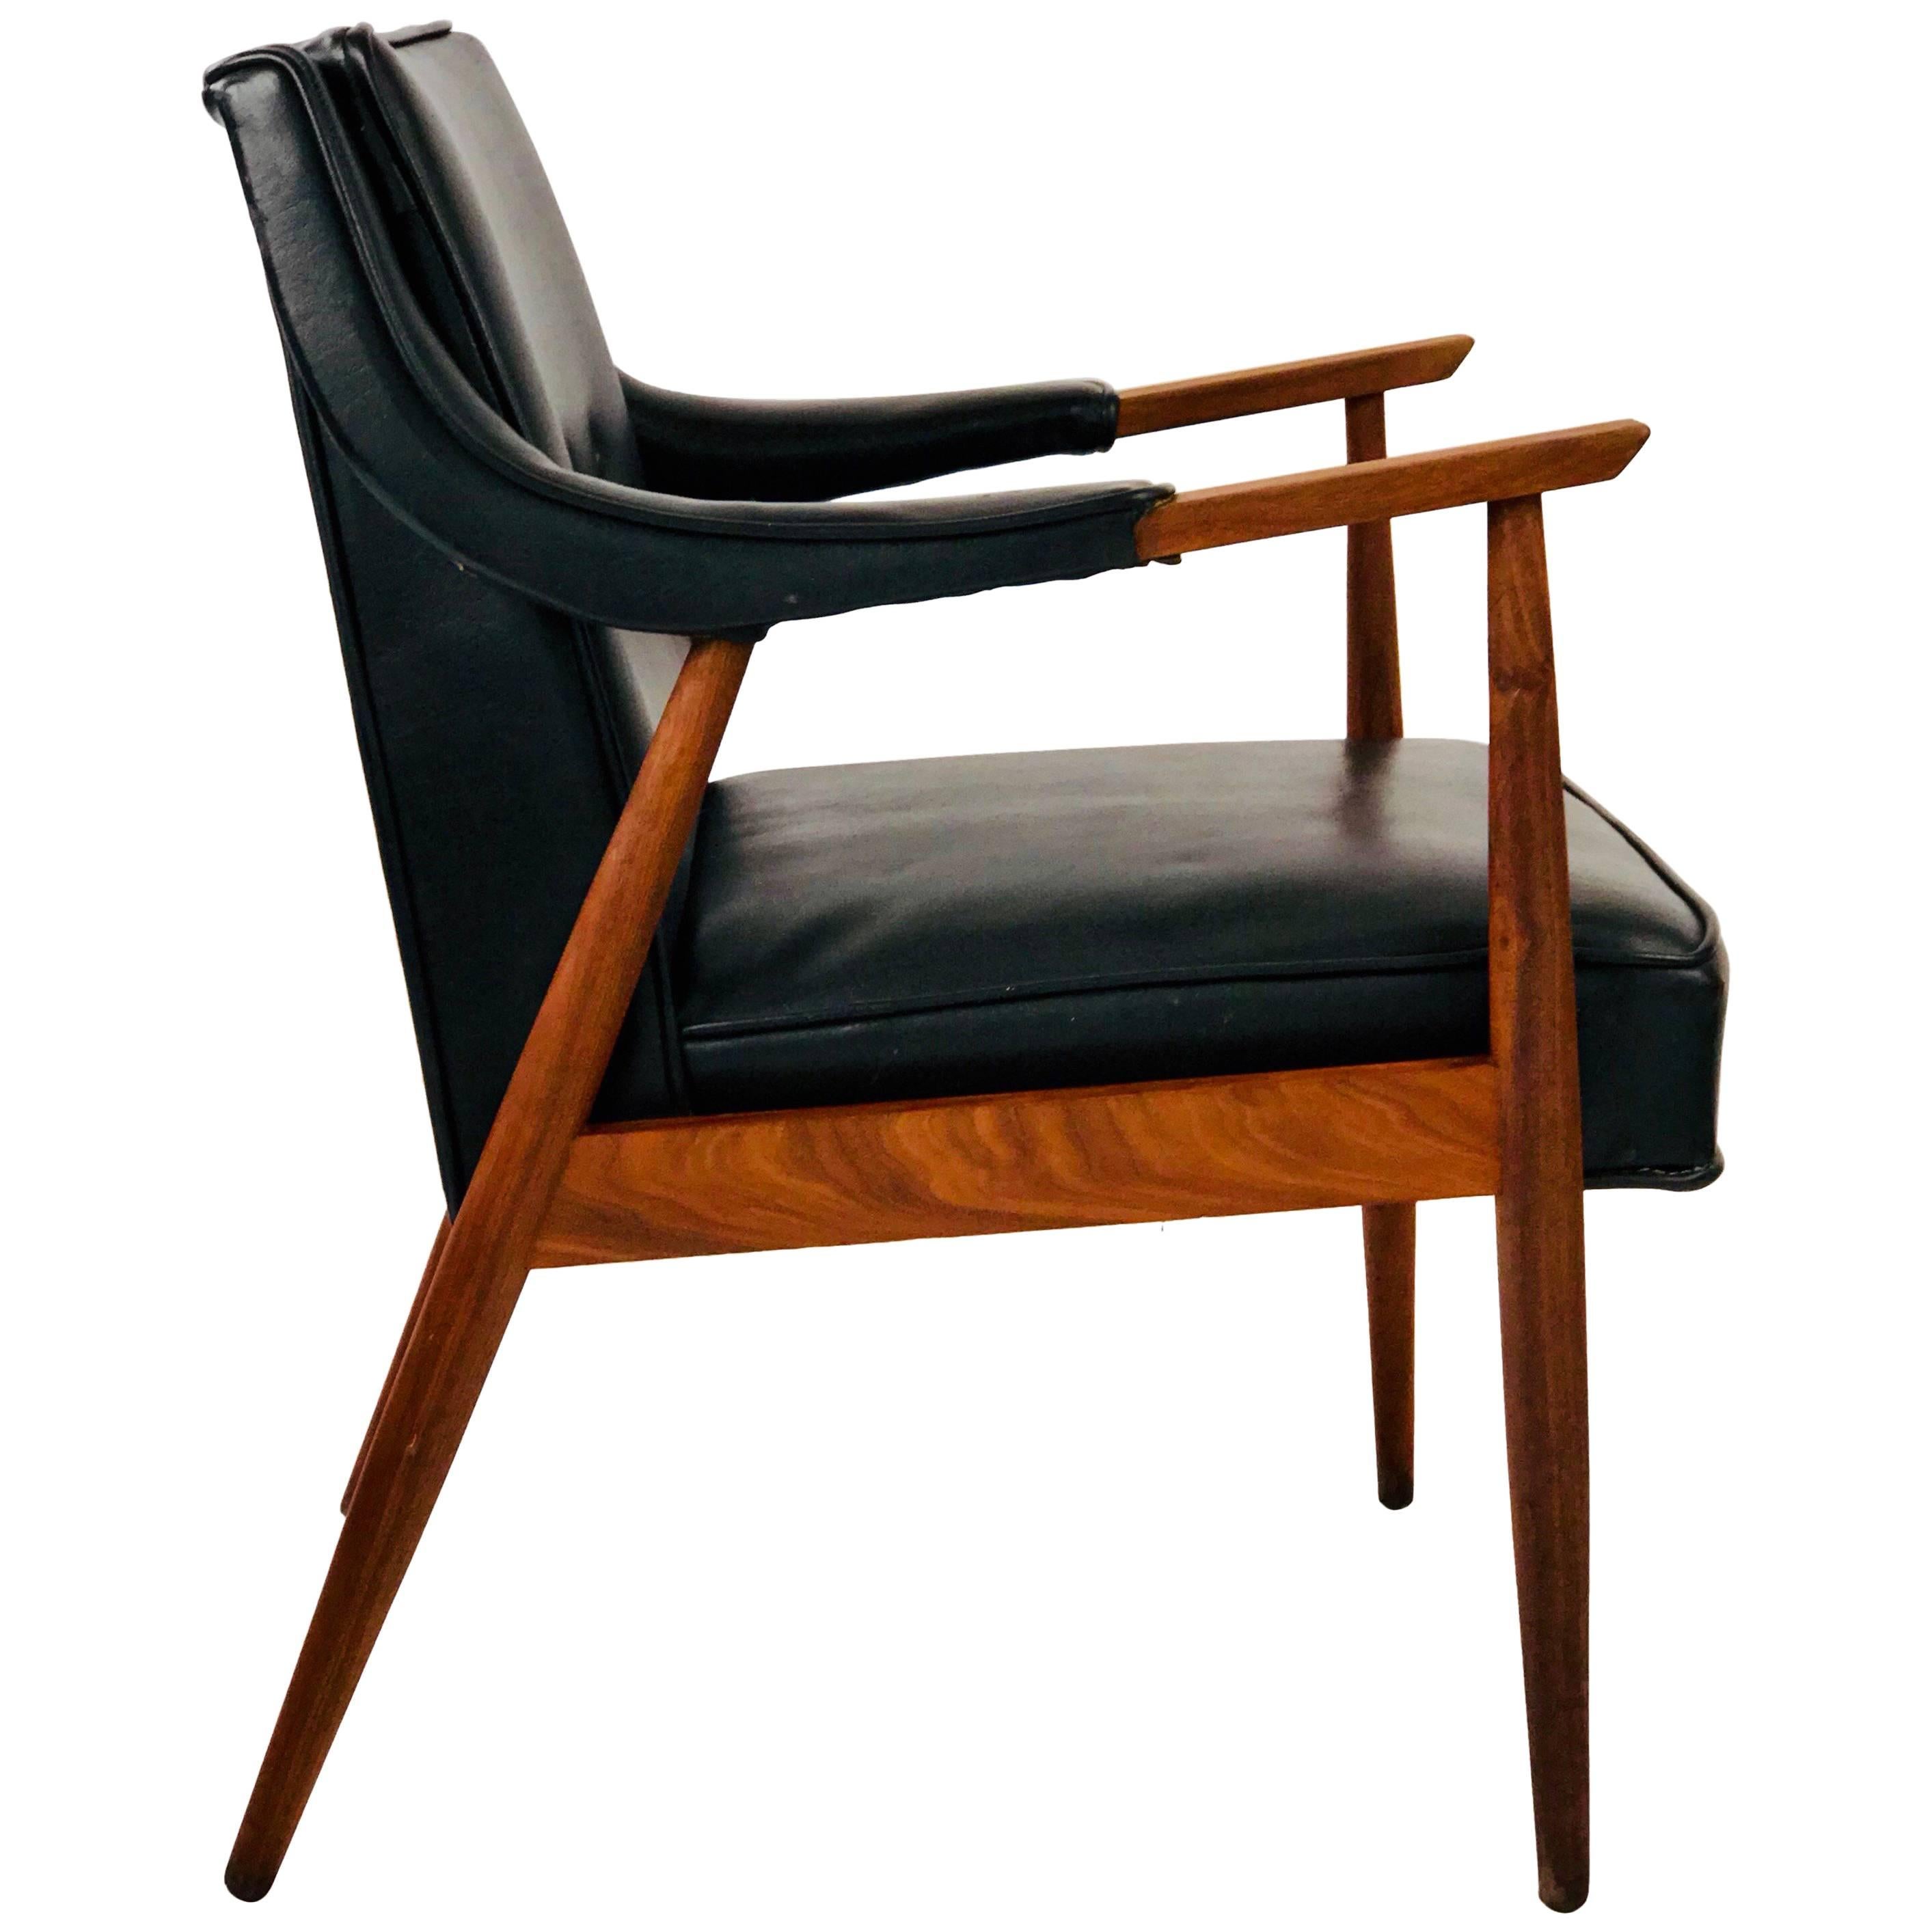 In the style of Jens Risom, this midcentury lounge chair is a classic example of Danish midcentury design. The teak arms and legs have a beautiful grain and flat oiled finish. Overall it is a solid and firm chair in great vintage condition. Original